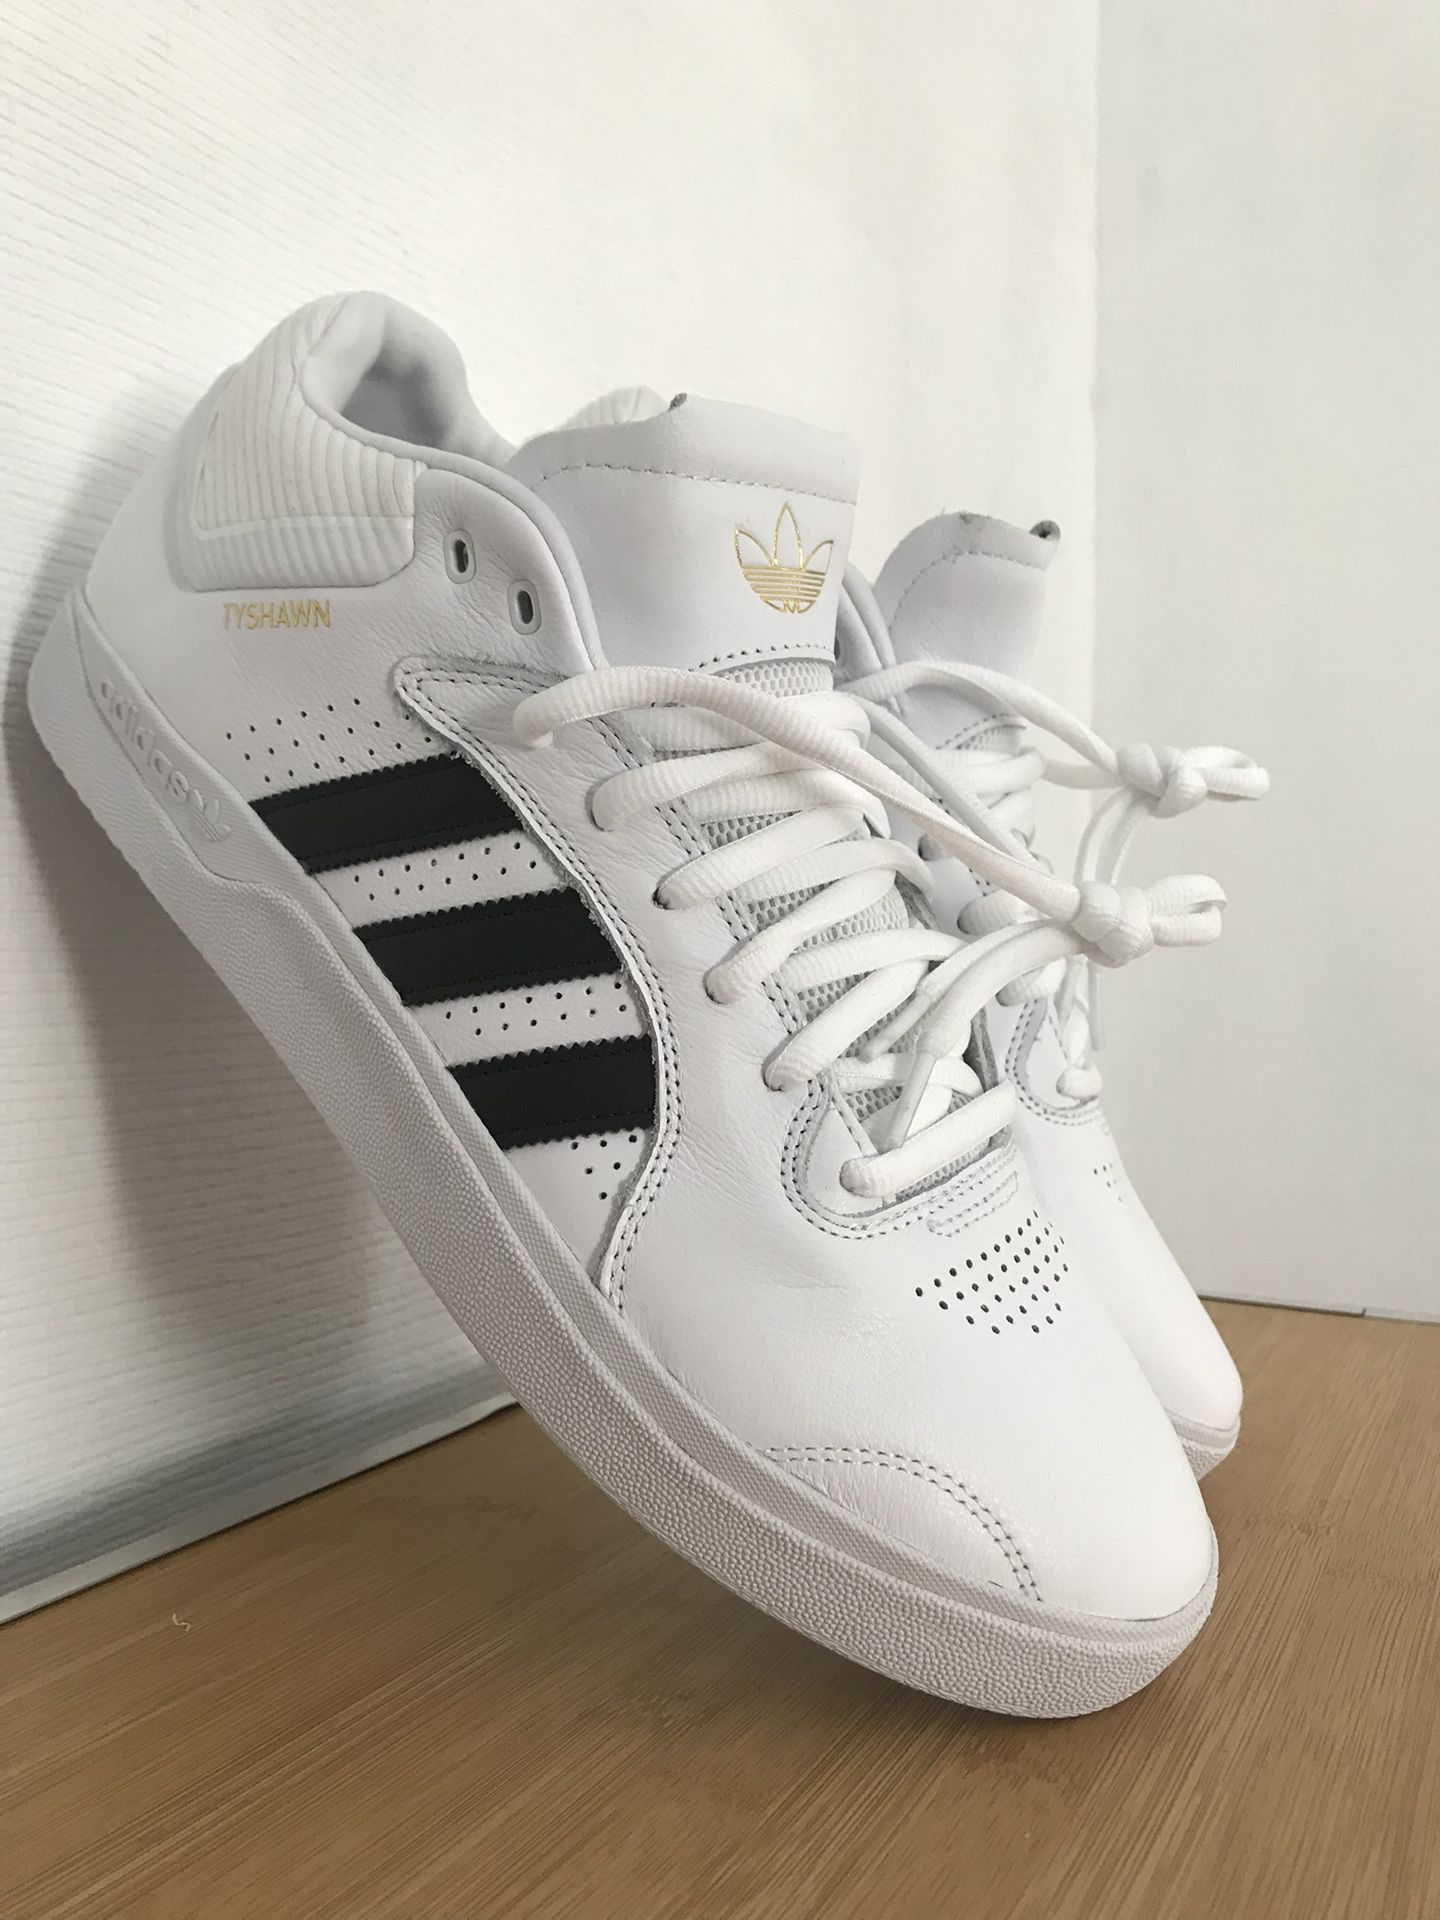 adidas sneakers shoes Tyshawn Mid White Black  US13 new original super quality